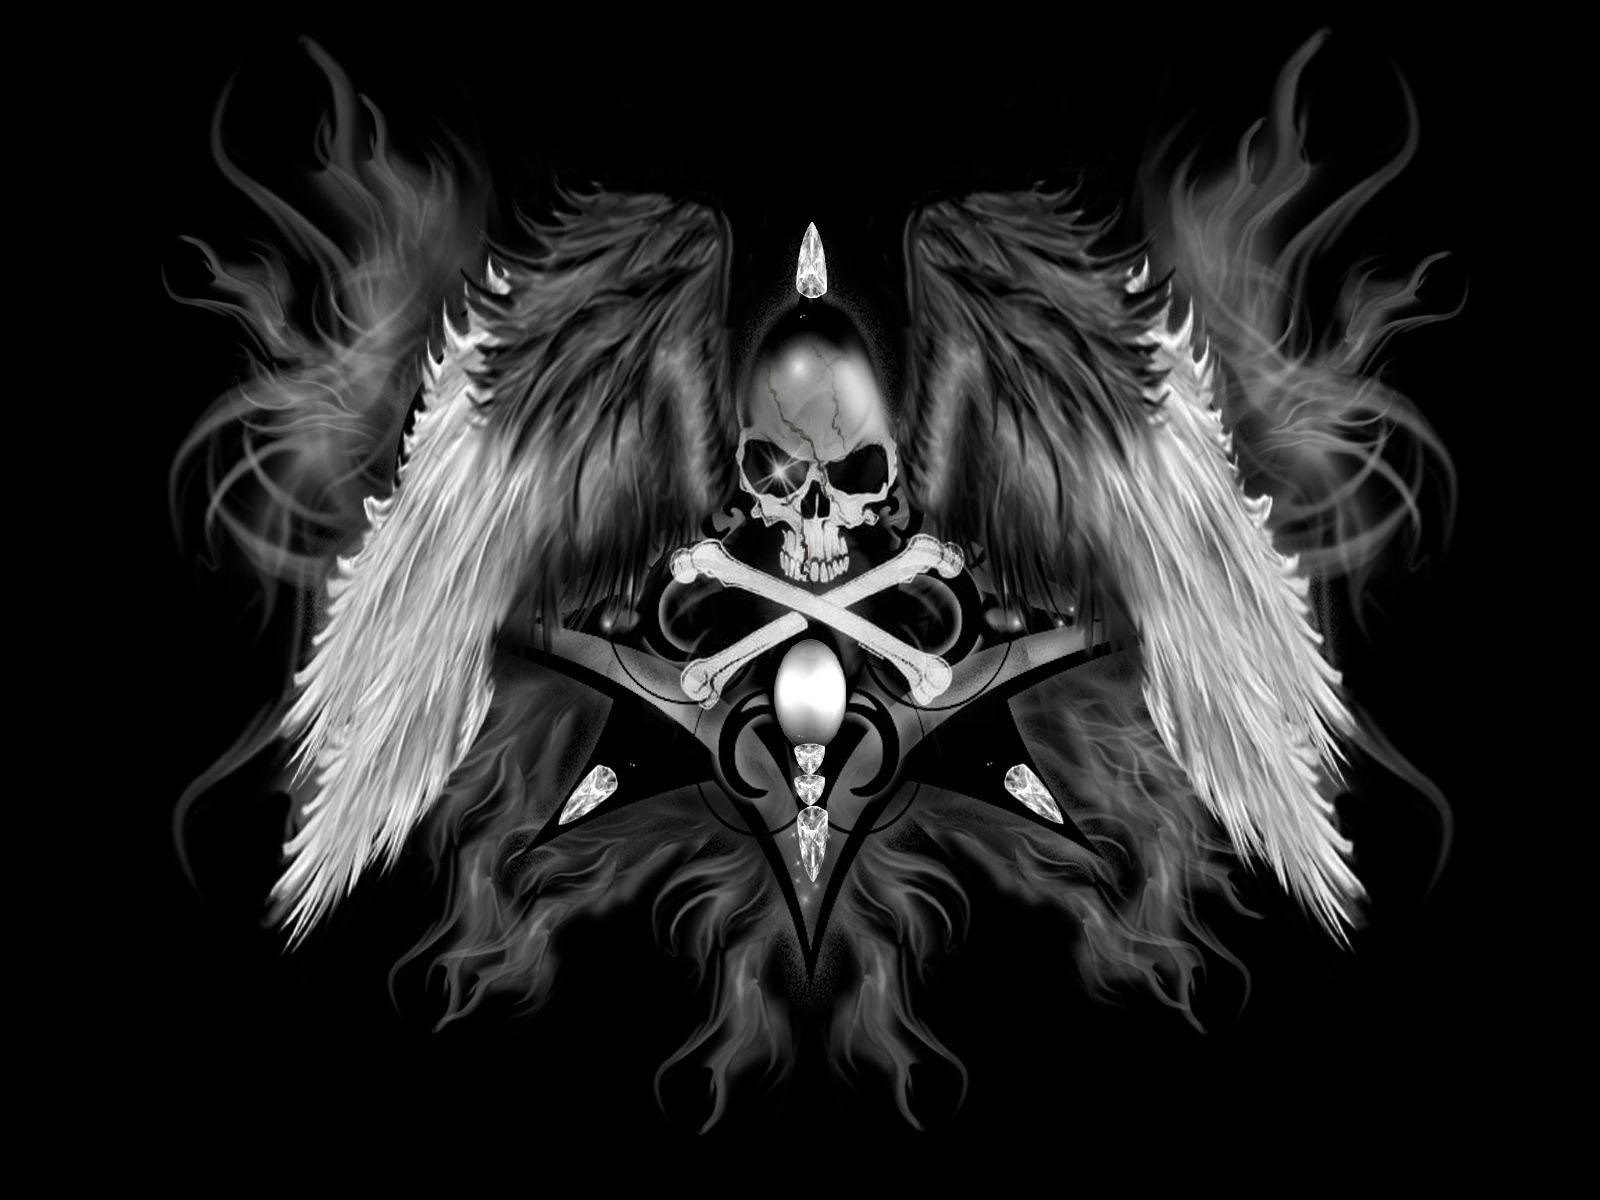 Skull With Wings And Crossbones On Black Background Wallpaper